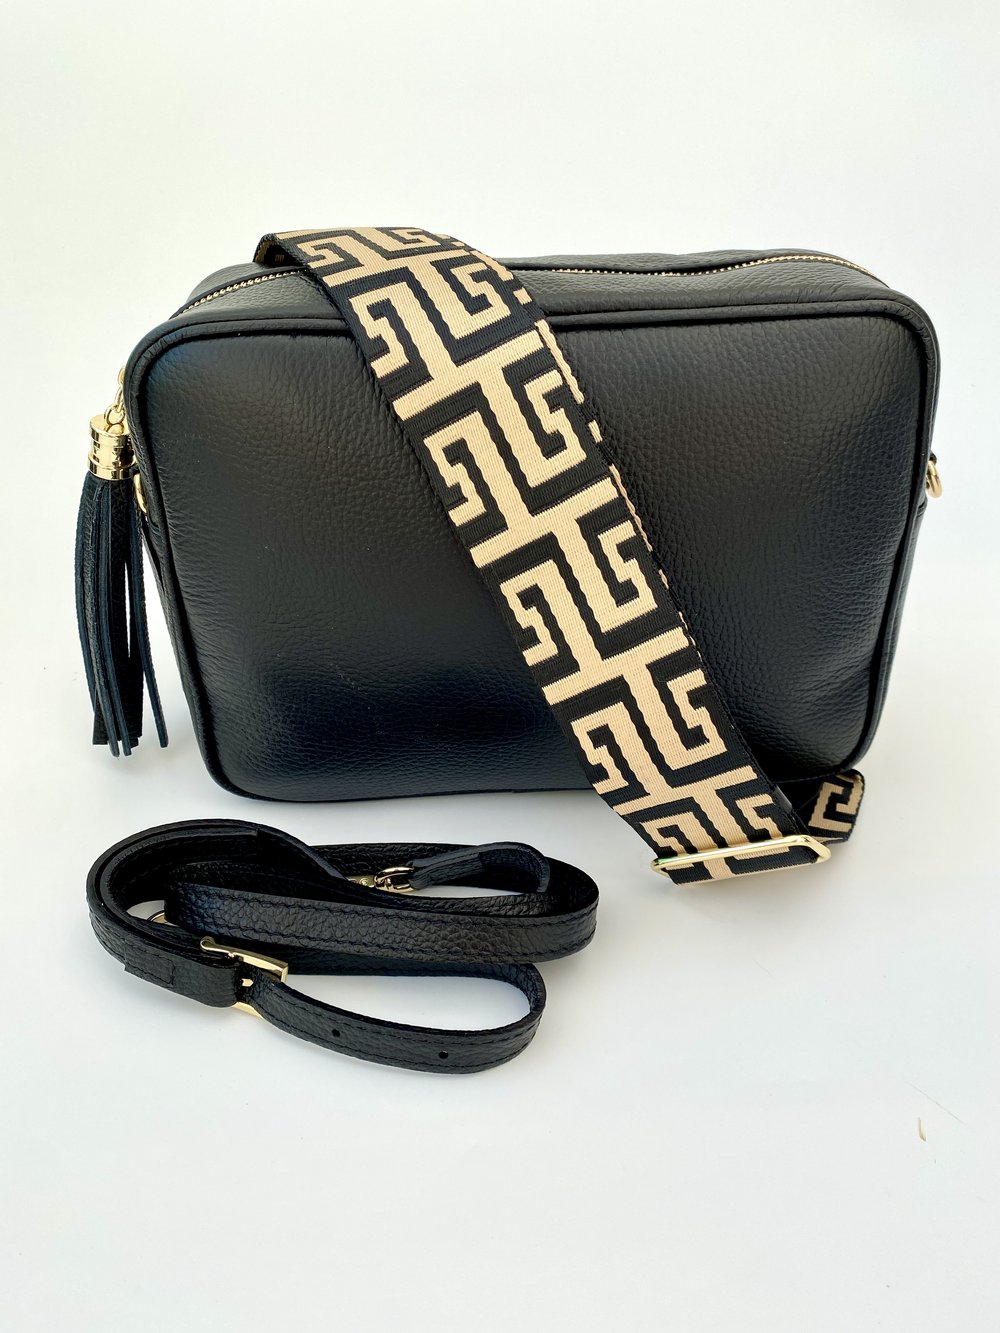 Stylish gifts, fashion & interior accessories, for you, for friends and for  your home - Large Leather Cross Body Box Bag